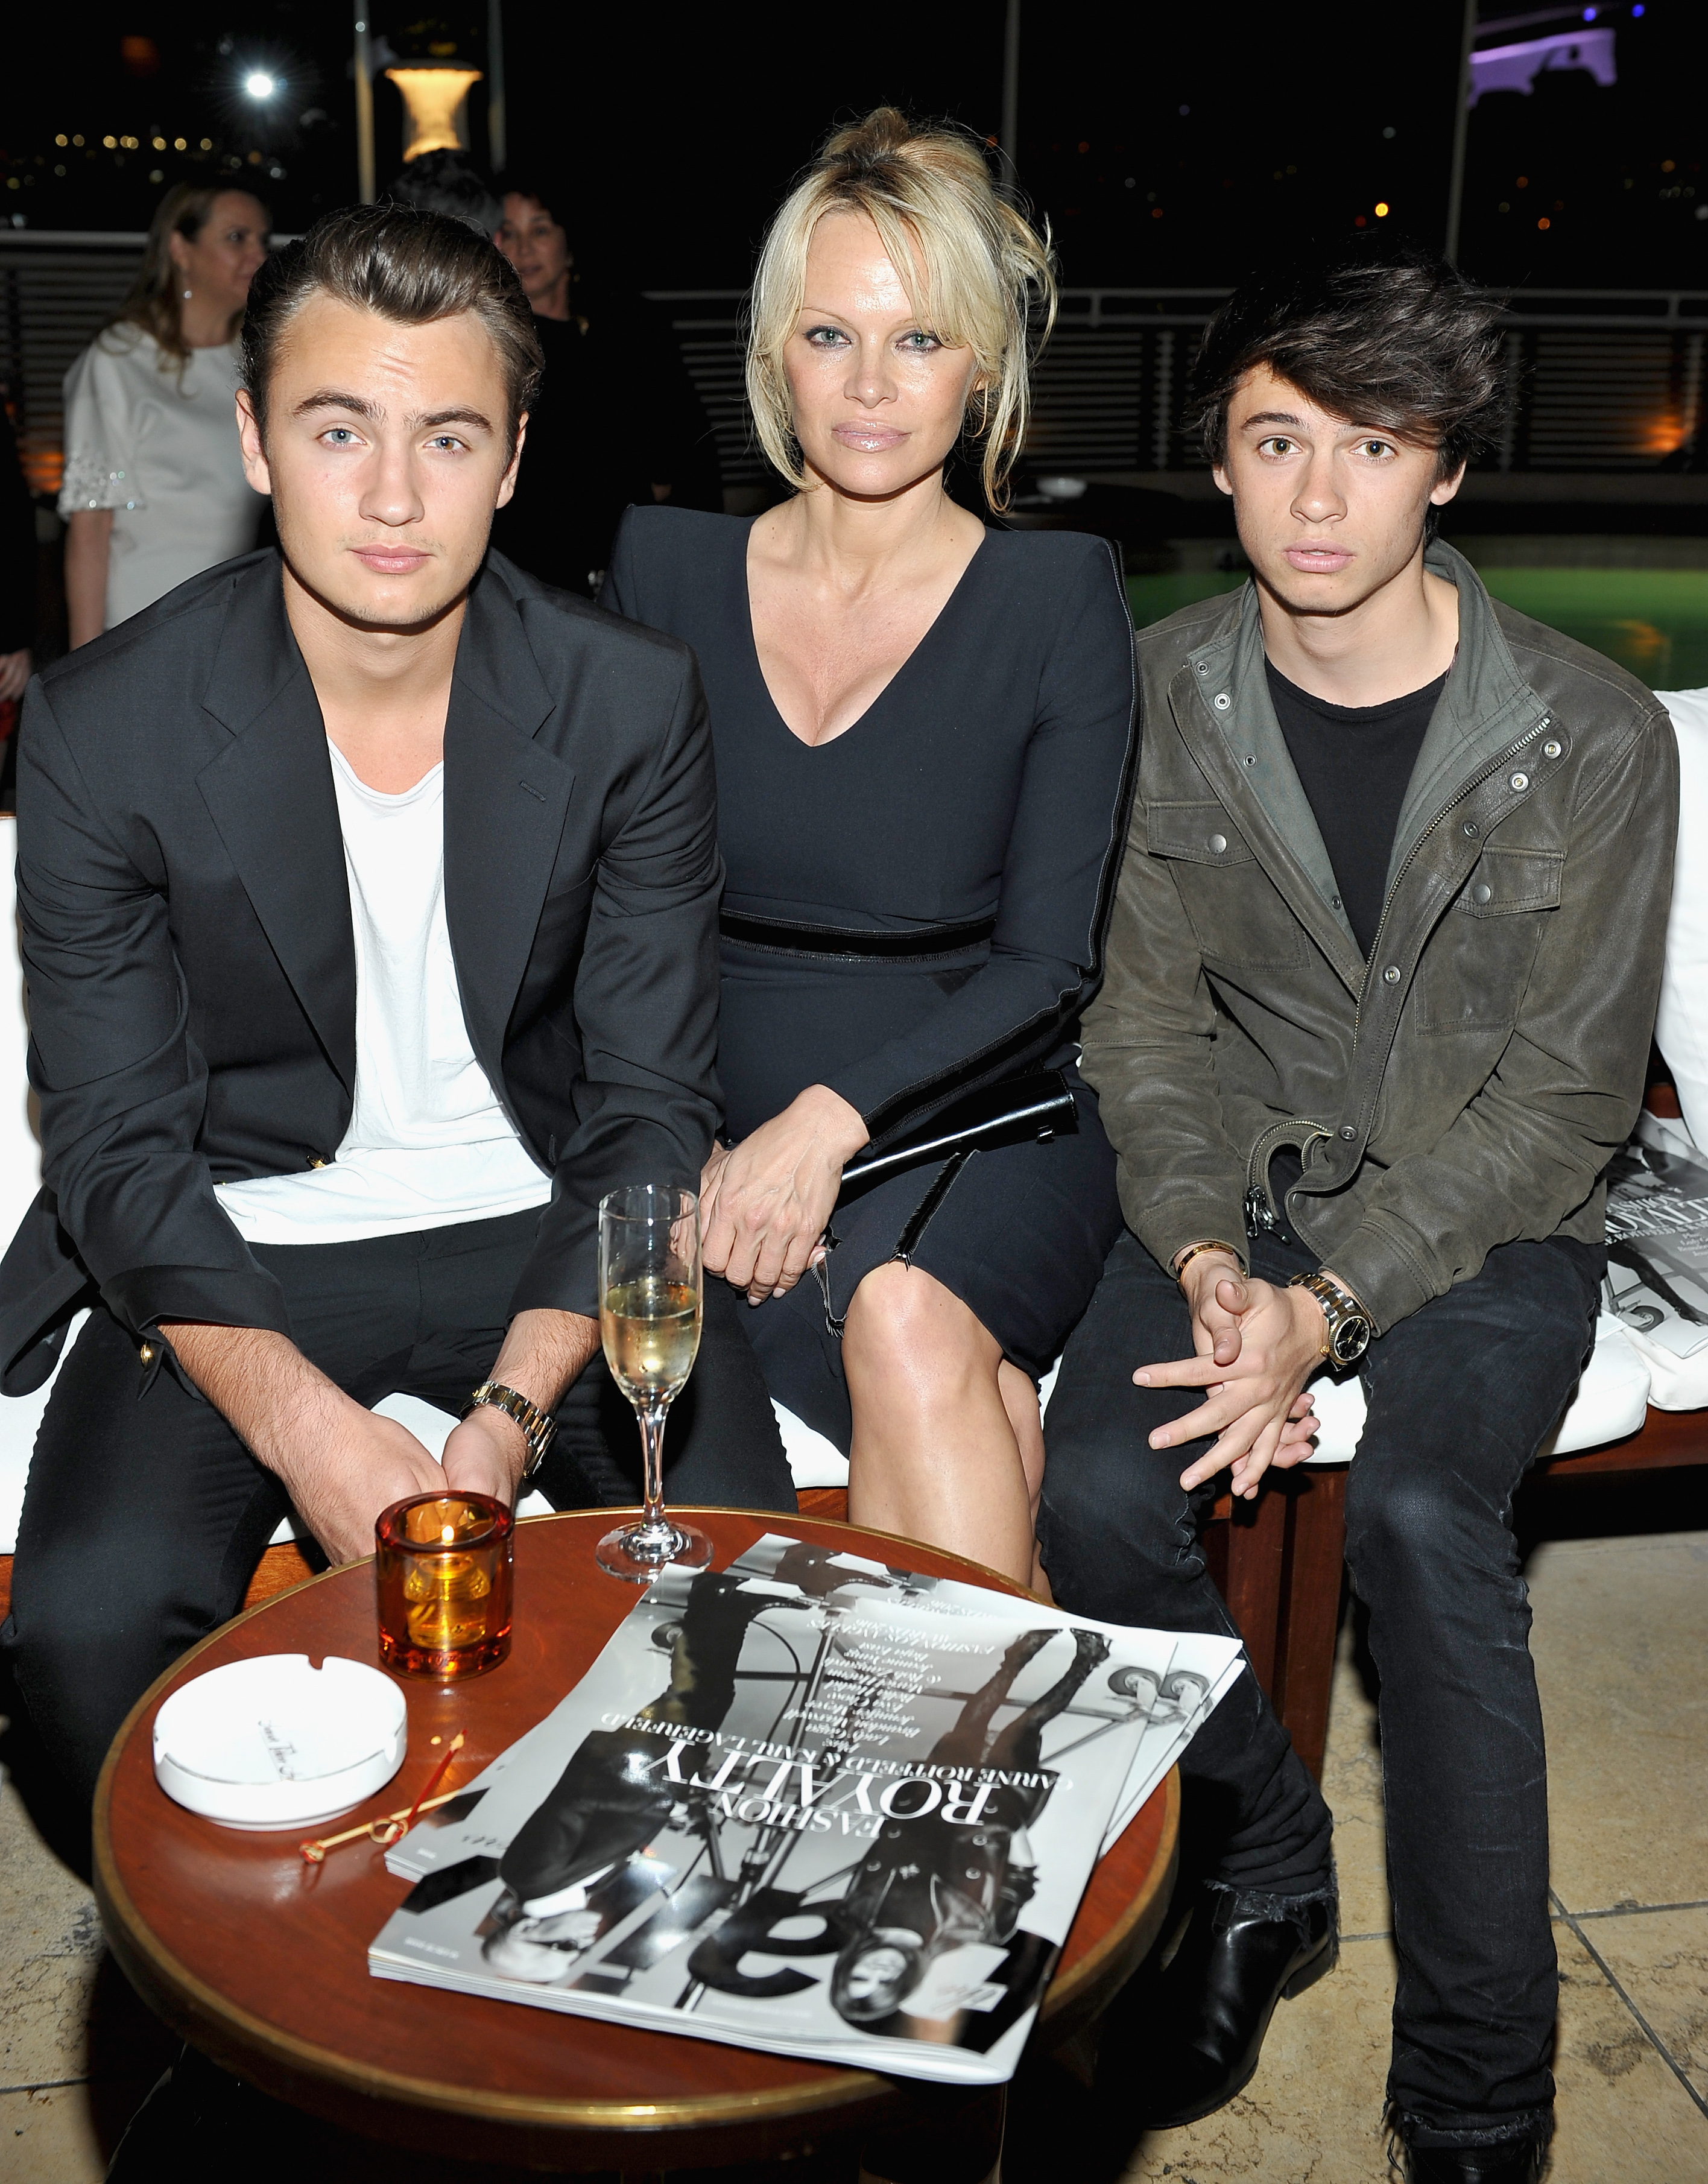 Pamela Anderson (C) and her sons Brandon Thomas Lee (L) and Dylan Jagger Lee attend The Daily Front Row "Fashion Los Angeles Awards" 2016, at Sunset Tower Hotel, on March 20, 2016, in West Hollywood, California.| Source: Getty Images